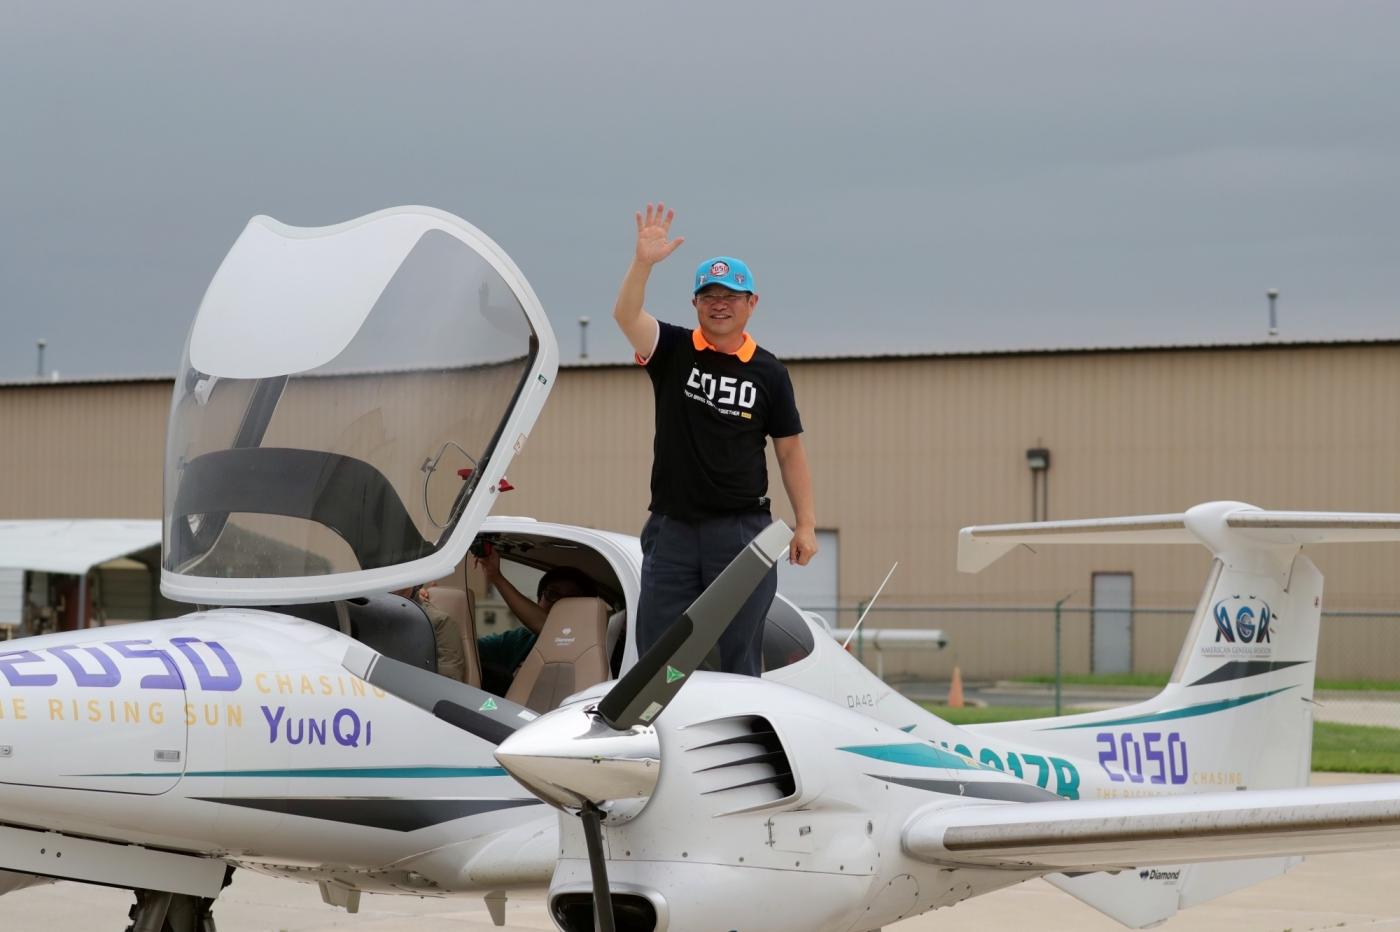 CHICAGO, June 10, 2019 (Xinhua) -- Zhang Bo waves to family members and friends after landing at an airport in Chicago, the United States, on June 9, 2019. After flying 68 days and making 50 stops, 57-year-old Bo Zhang completed his second around-the-world flight and landed in Chicago on Sunday morning. On April 2, Zhang kicked off the flight in the same airport in Chicago. In 68 days, he flied through 21 countries in three continents and over three oceans, with total mileage reaching 41,000 kilometers. (Xinhua/Wang Ping/IANS) by .